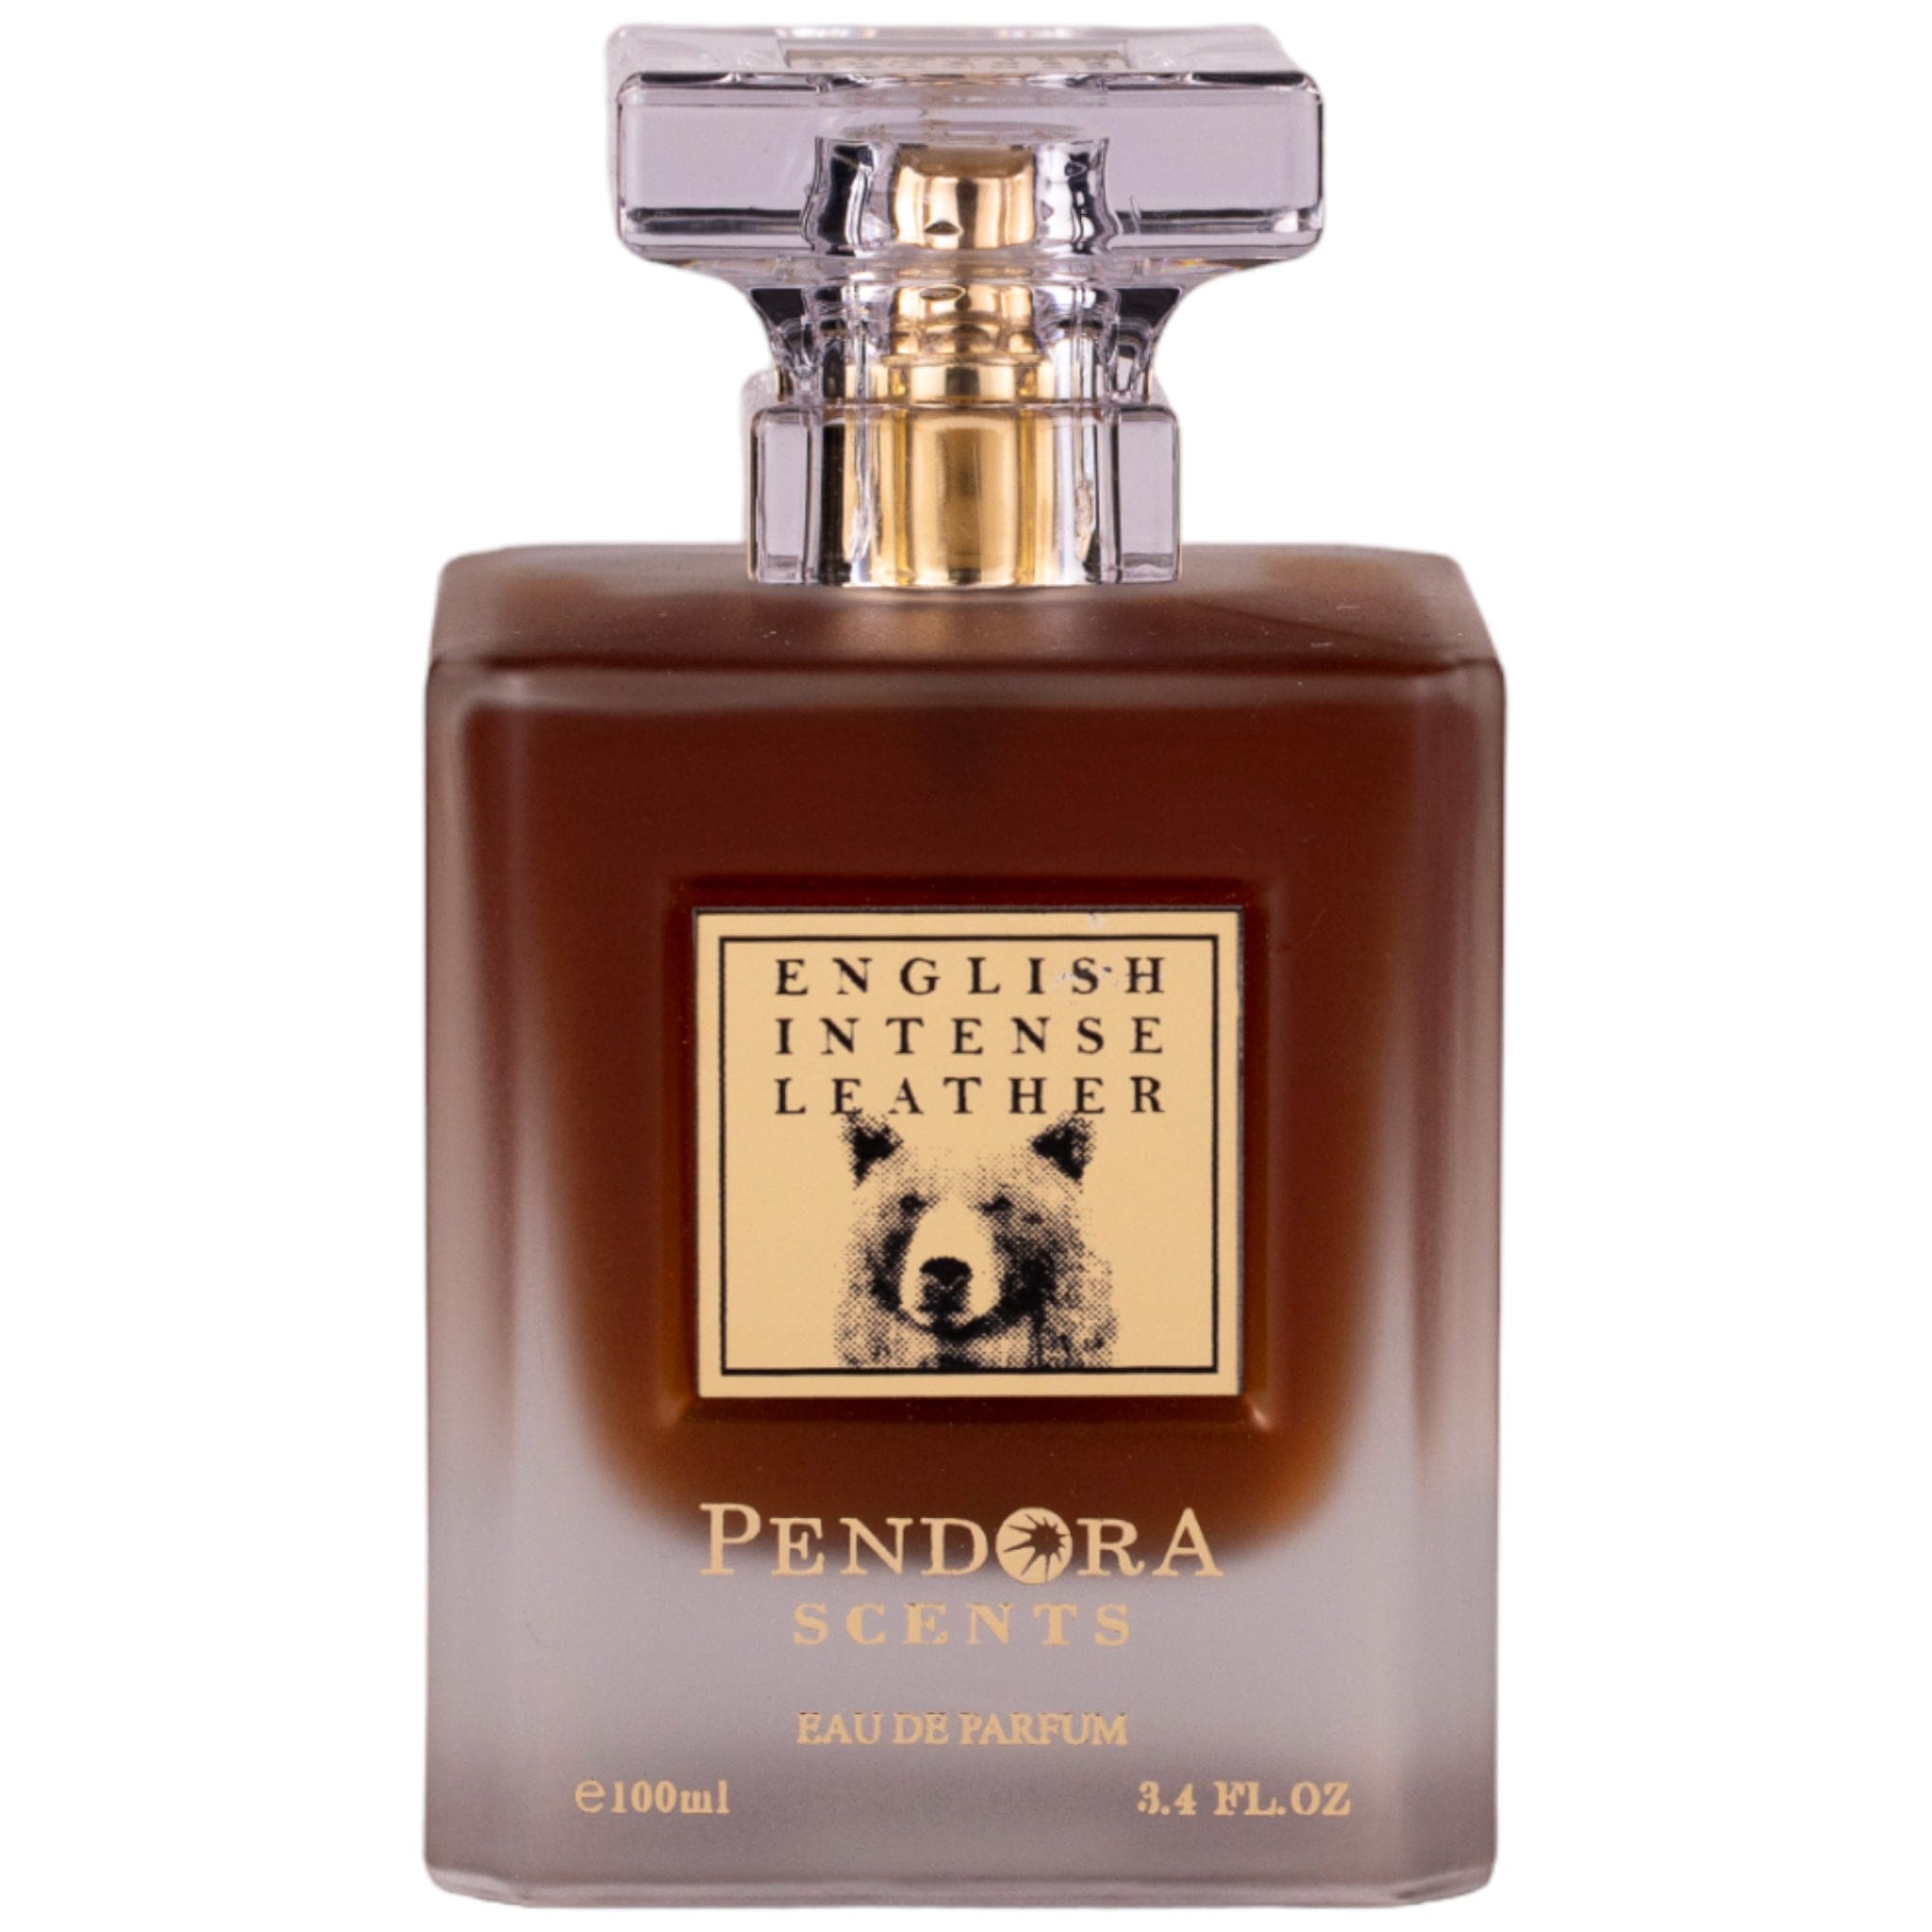 English Intense Leather 100ml by Pendora Scents by Paris Corner